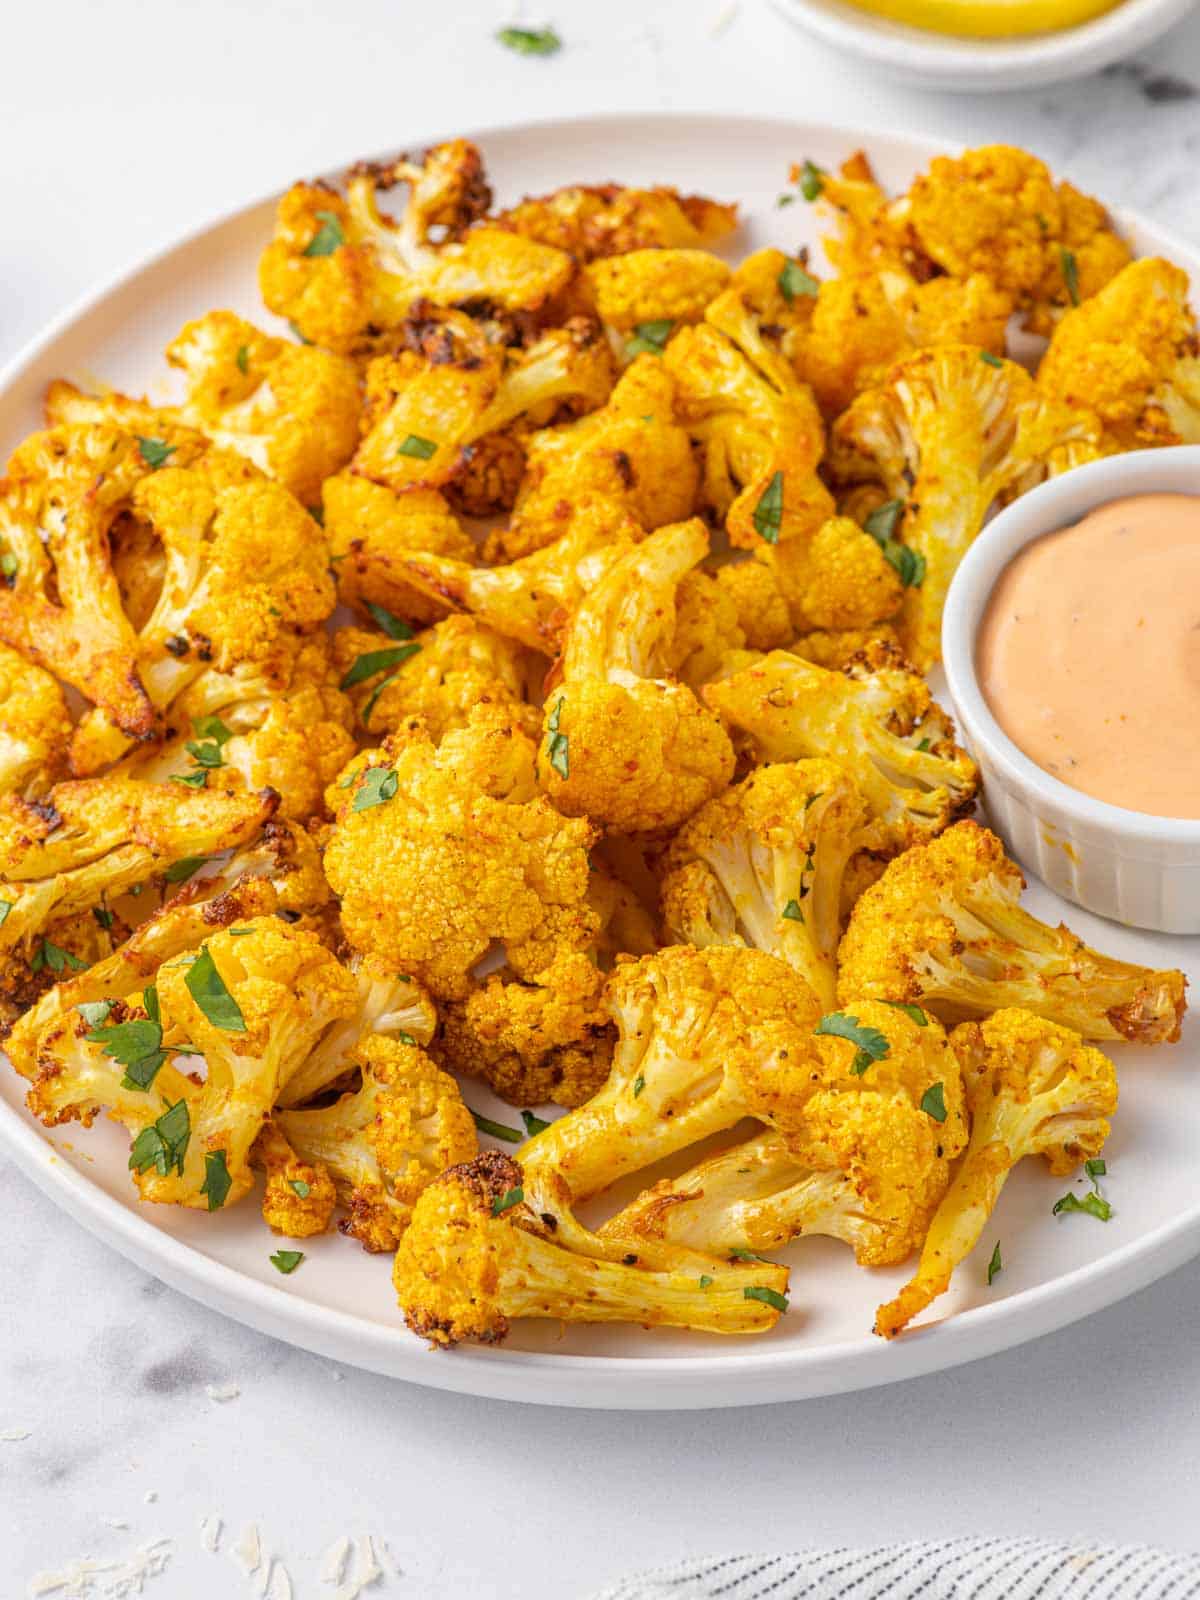 A plate of roasted cauliflower bites with dipping sauce.